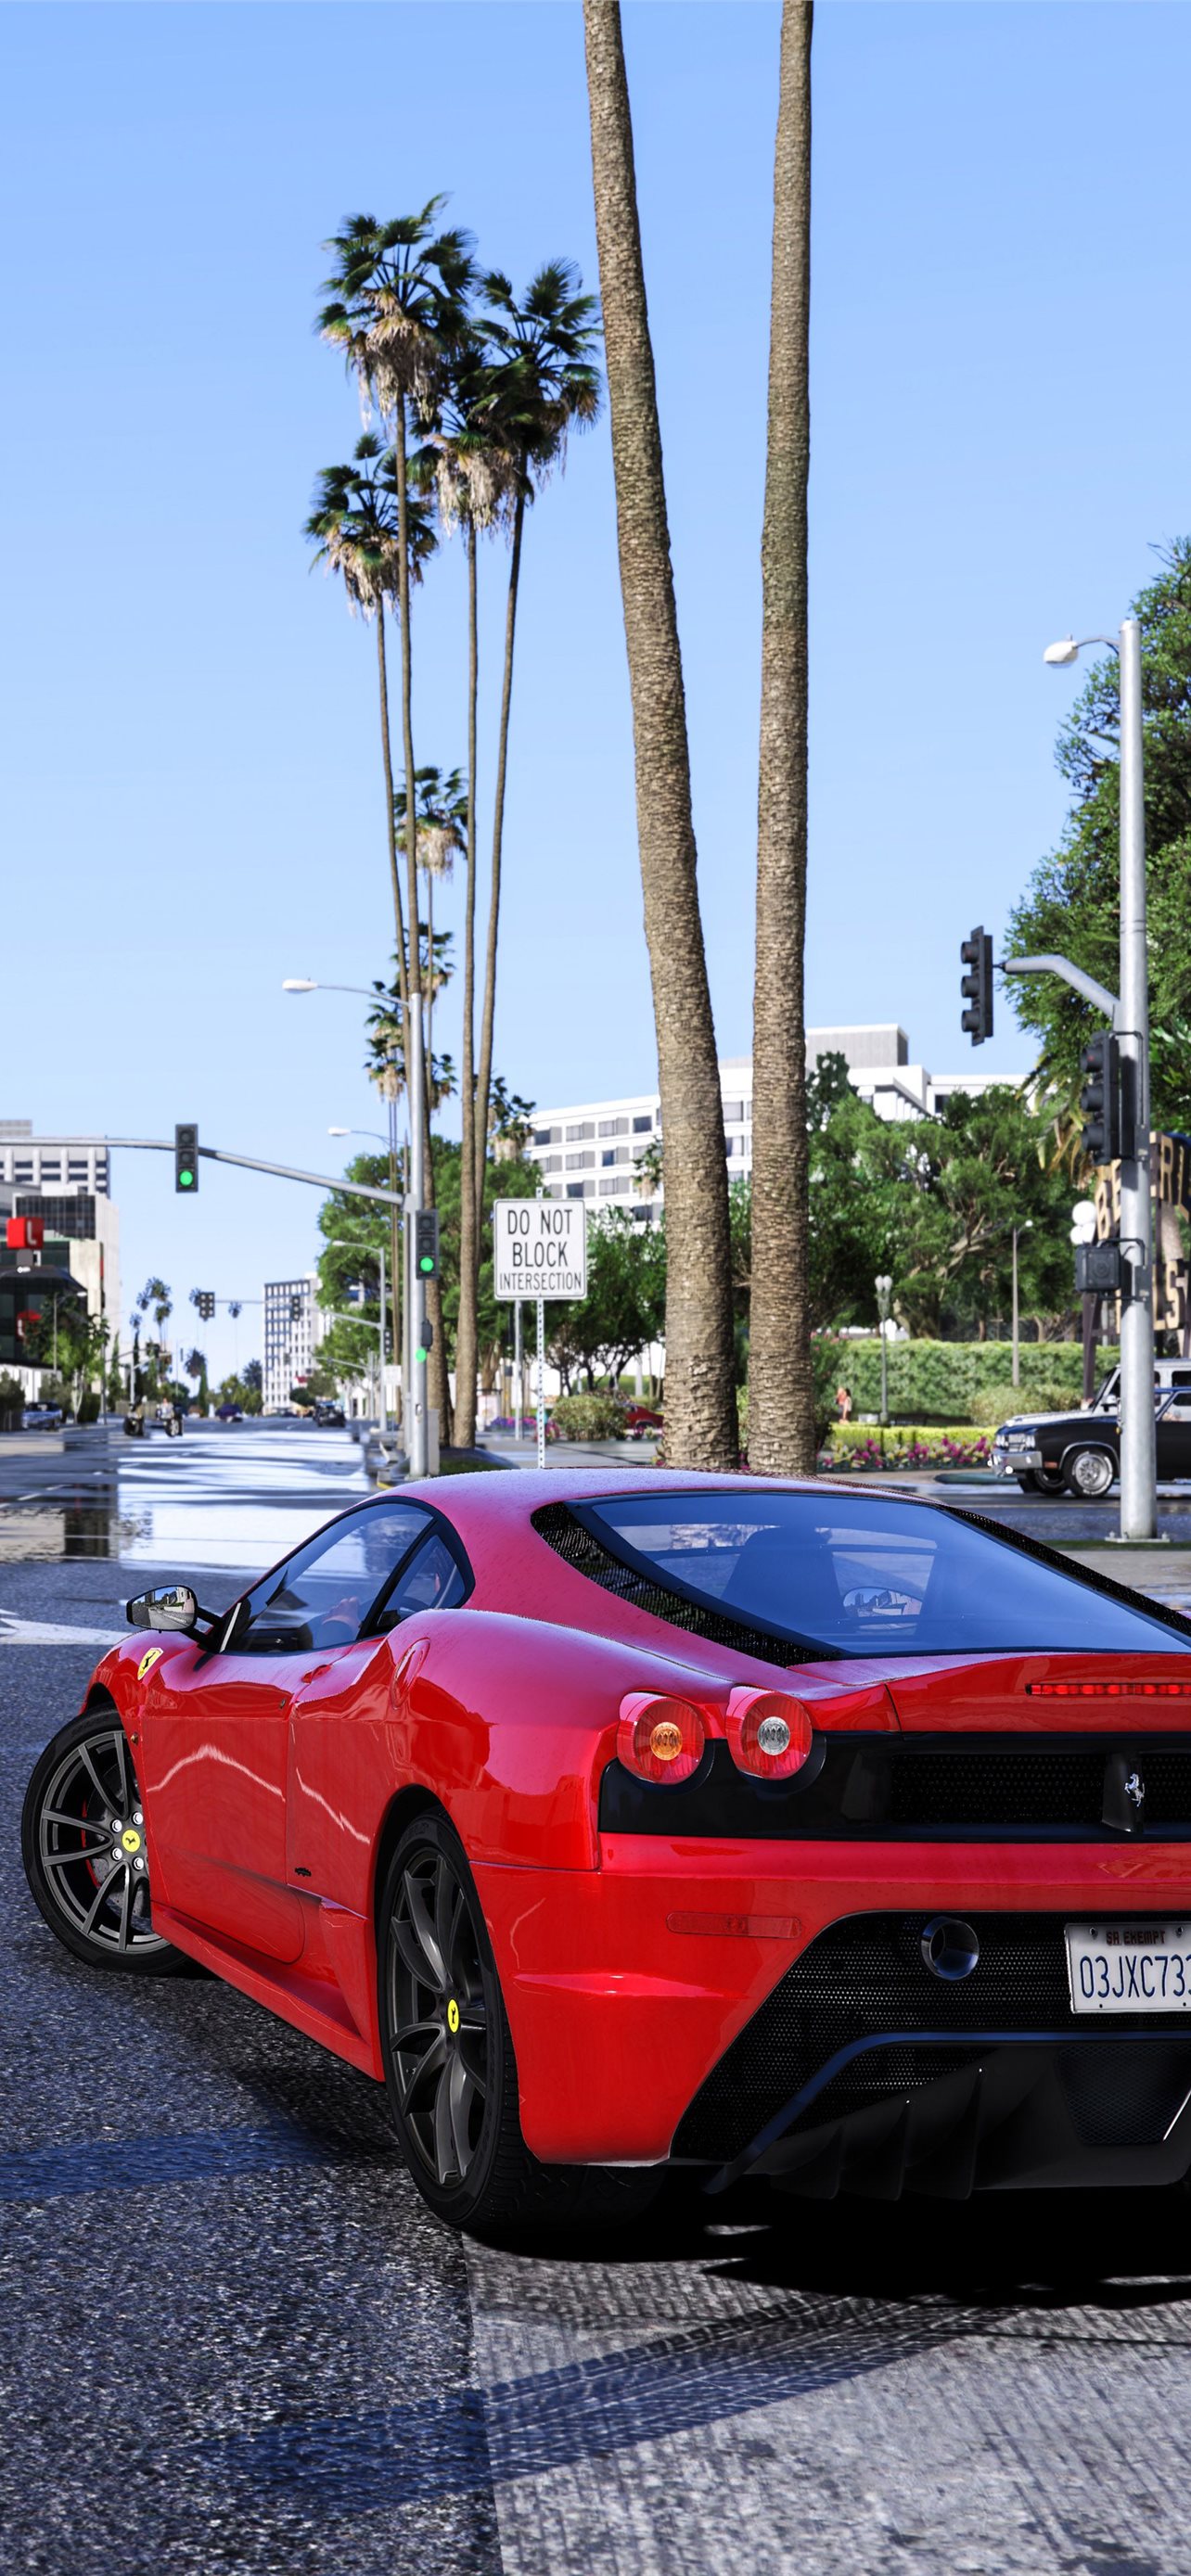 Download Grand Theft Auto 5 on iPhone Wallpaper